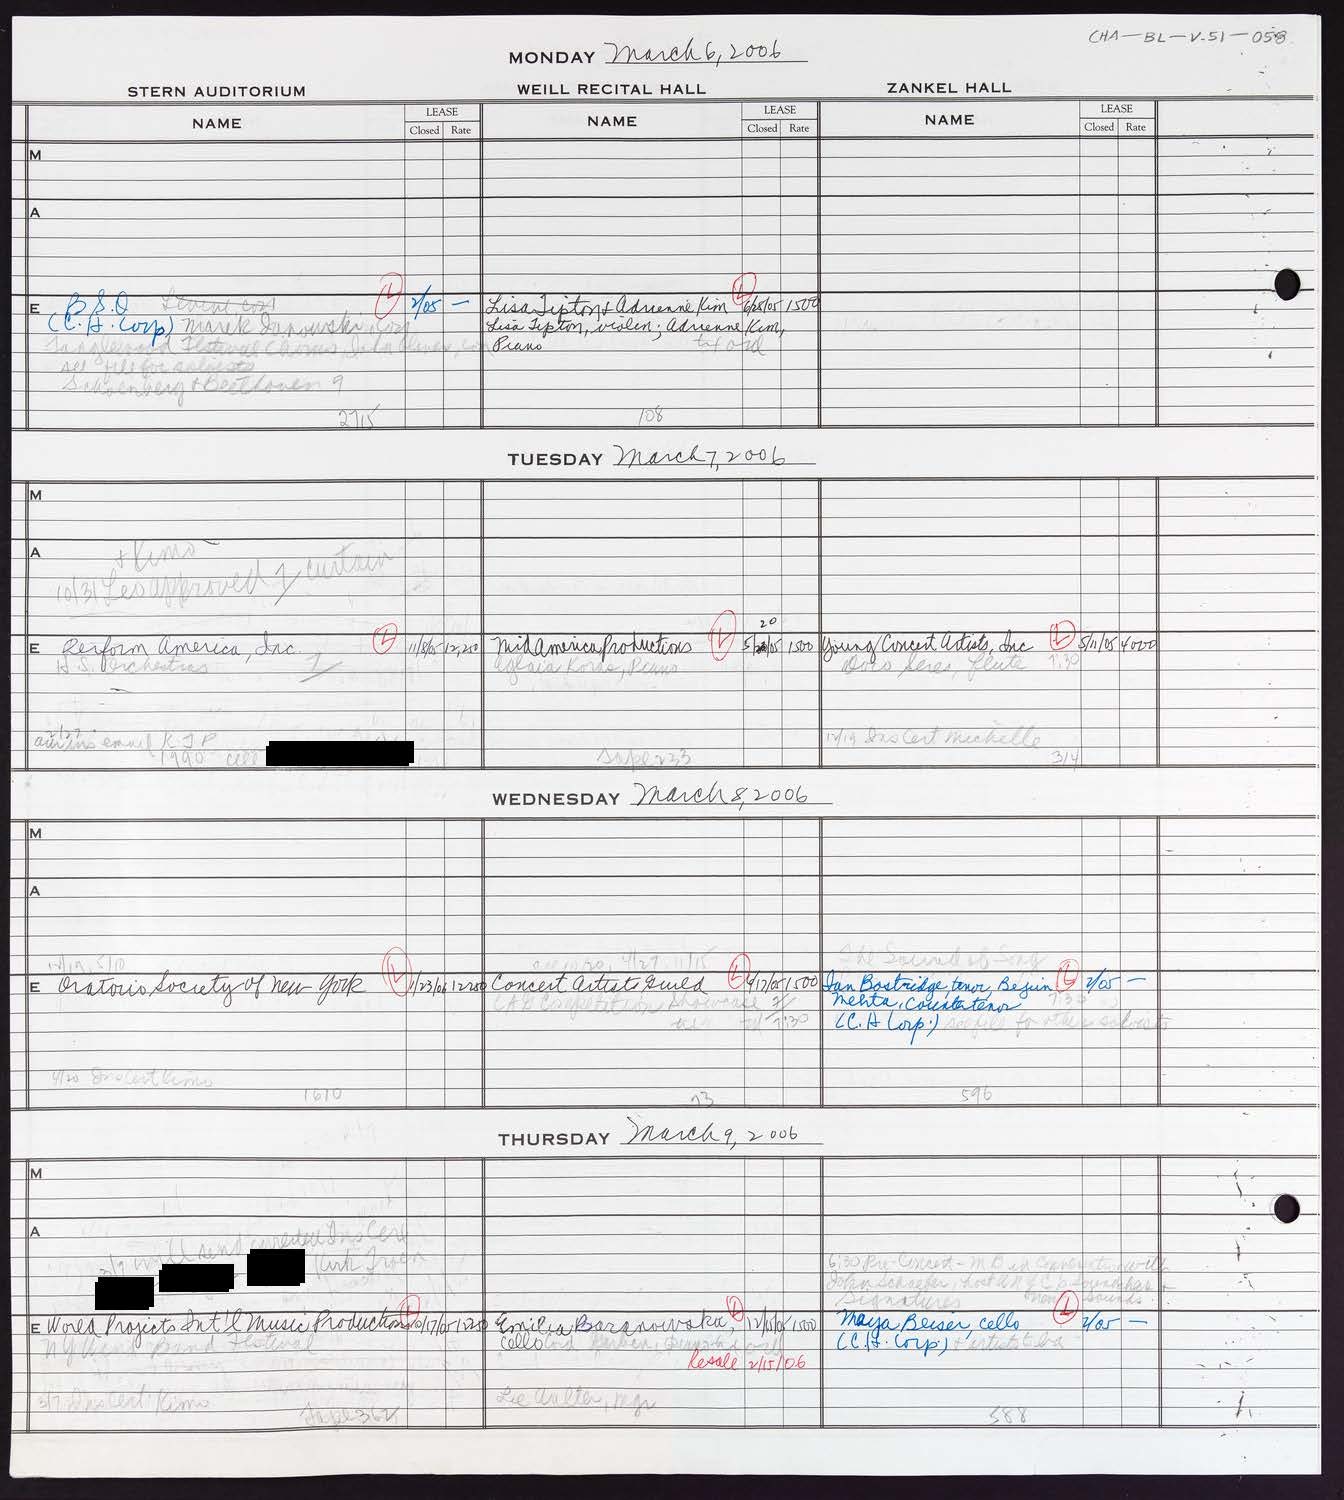 Carnegie Hall Booking Ledger, volume 51, page 58